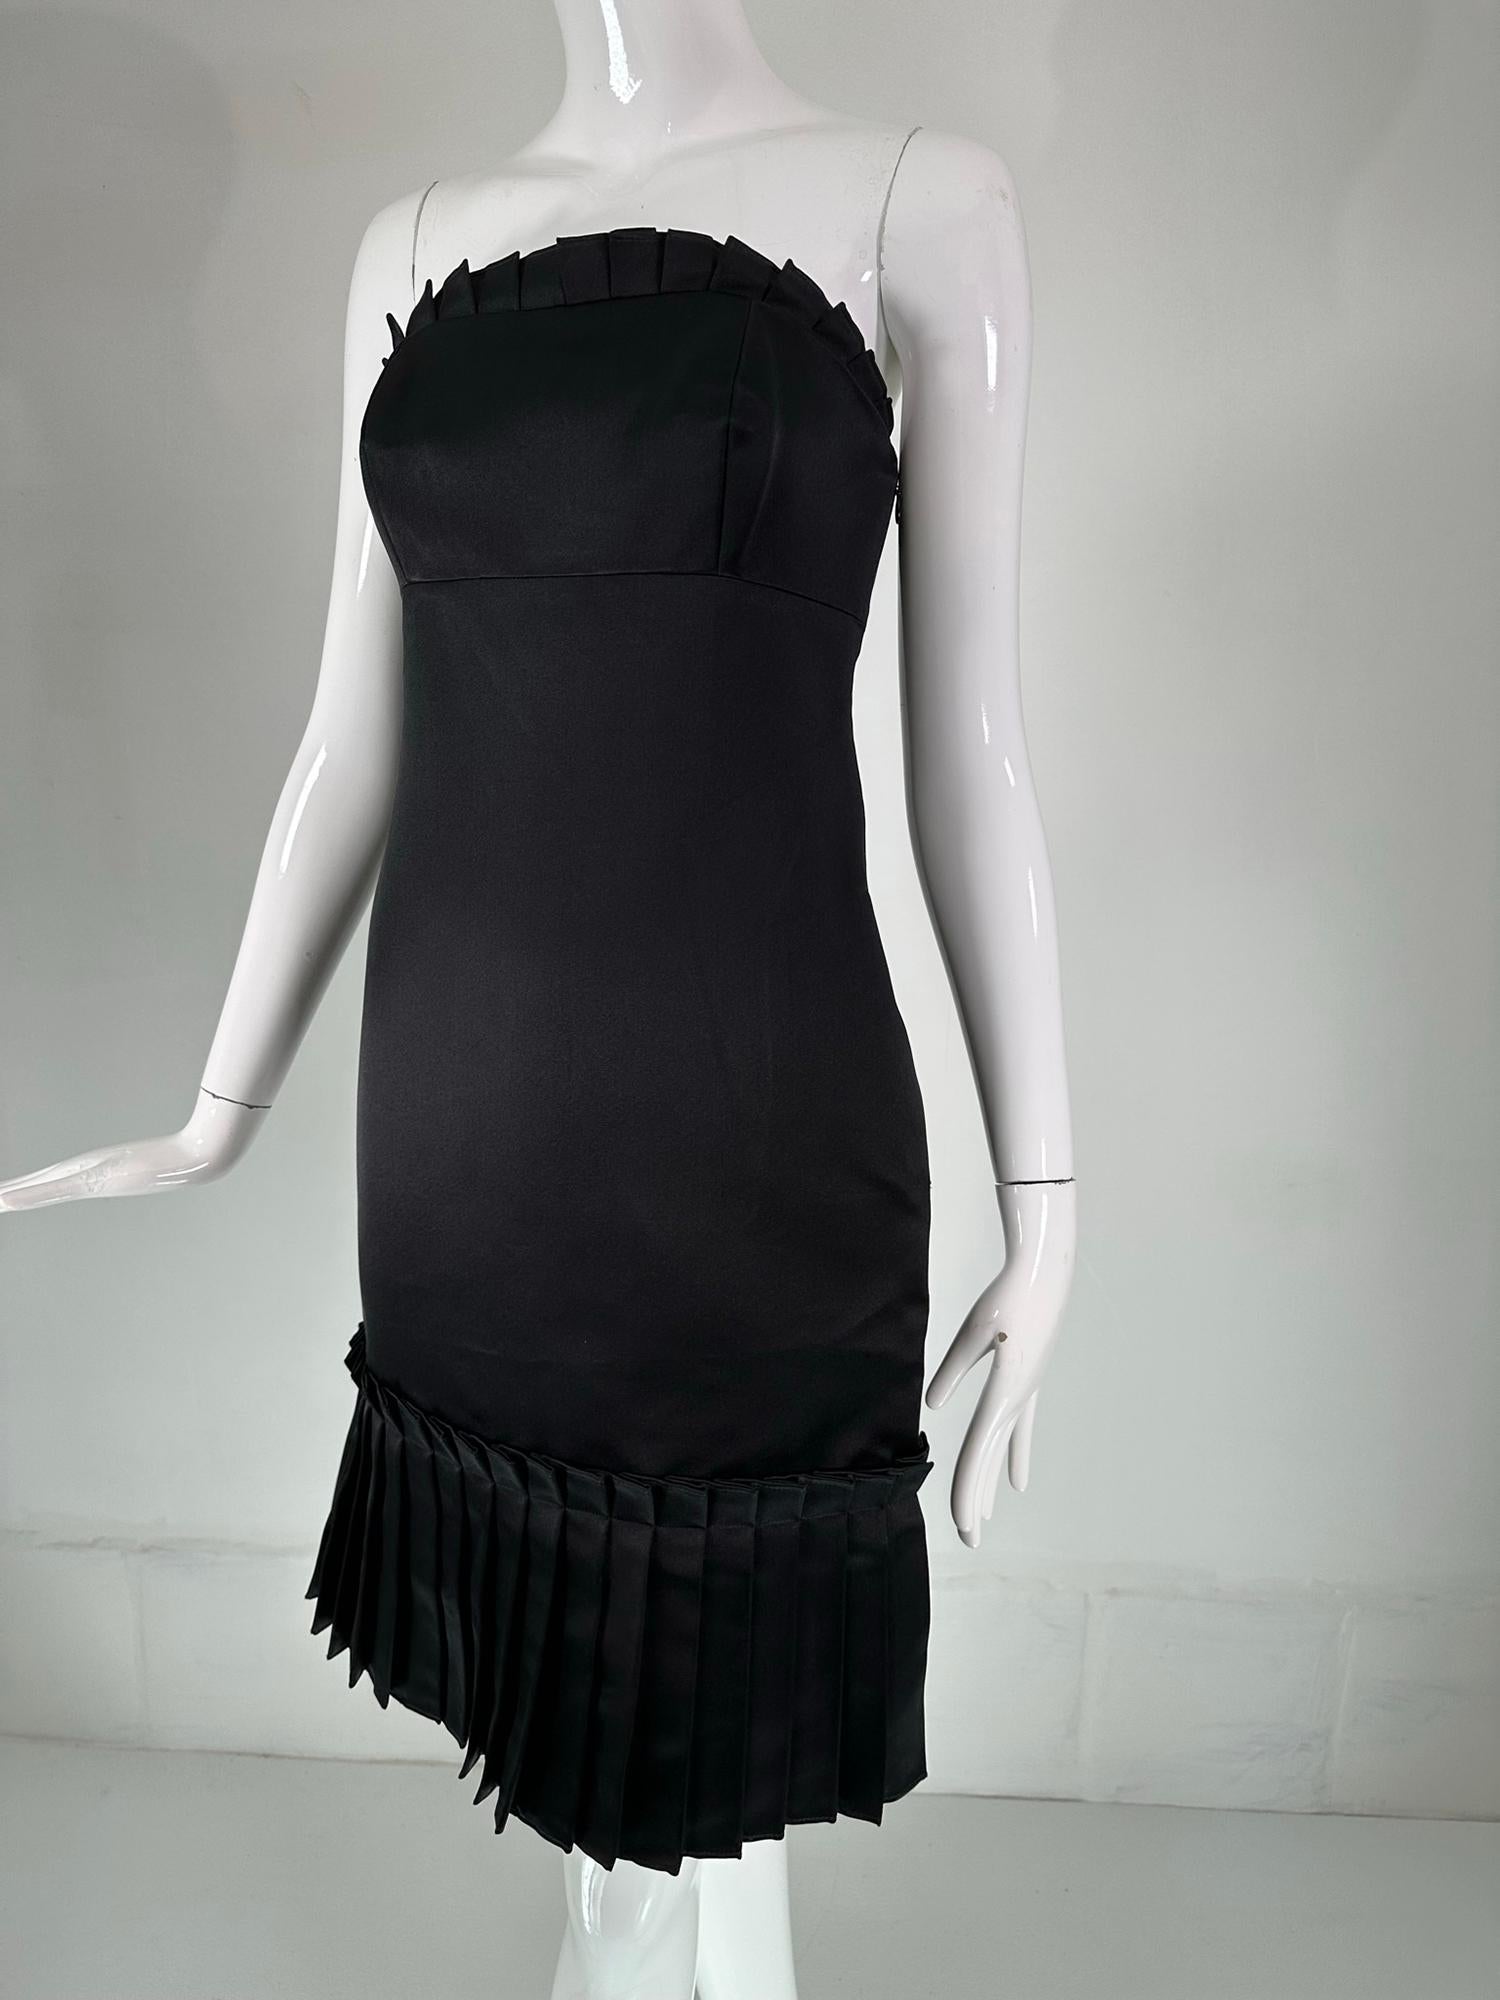 Bill Blass black silk satin strapless fitted cocktail dress with tailored ruffle at the bodice top. A classic and always in style, simple & elegant, this dress is perfect for any special event. Strapless dress has a narrow ruffle band at the top, it